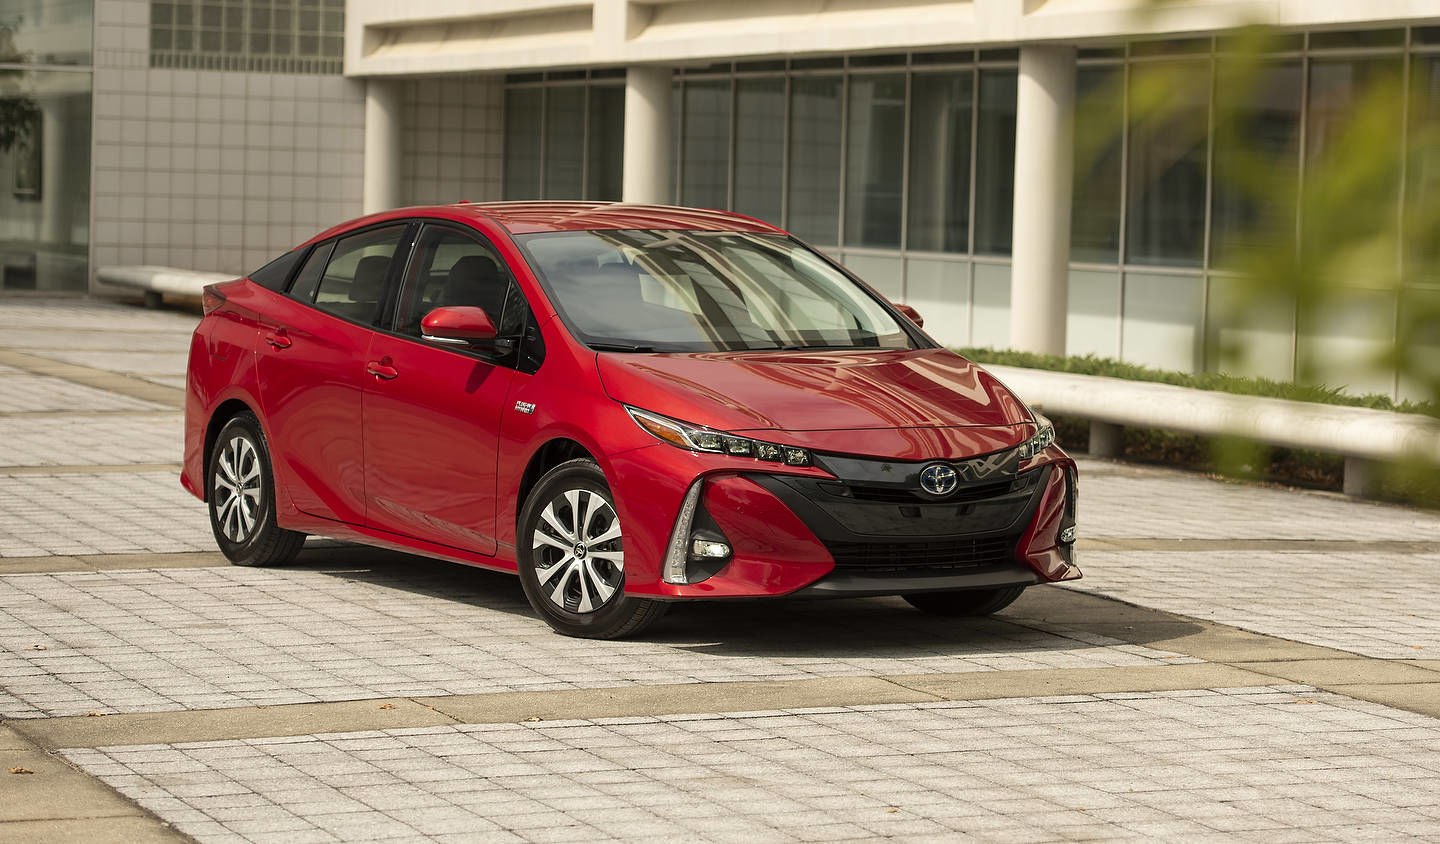 Three reasons to buy a Toyota Prius when you want a hybrid vehicle